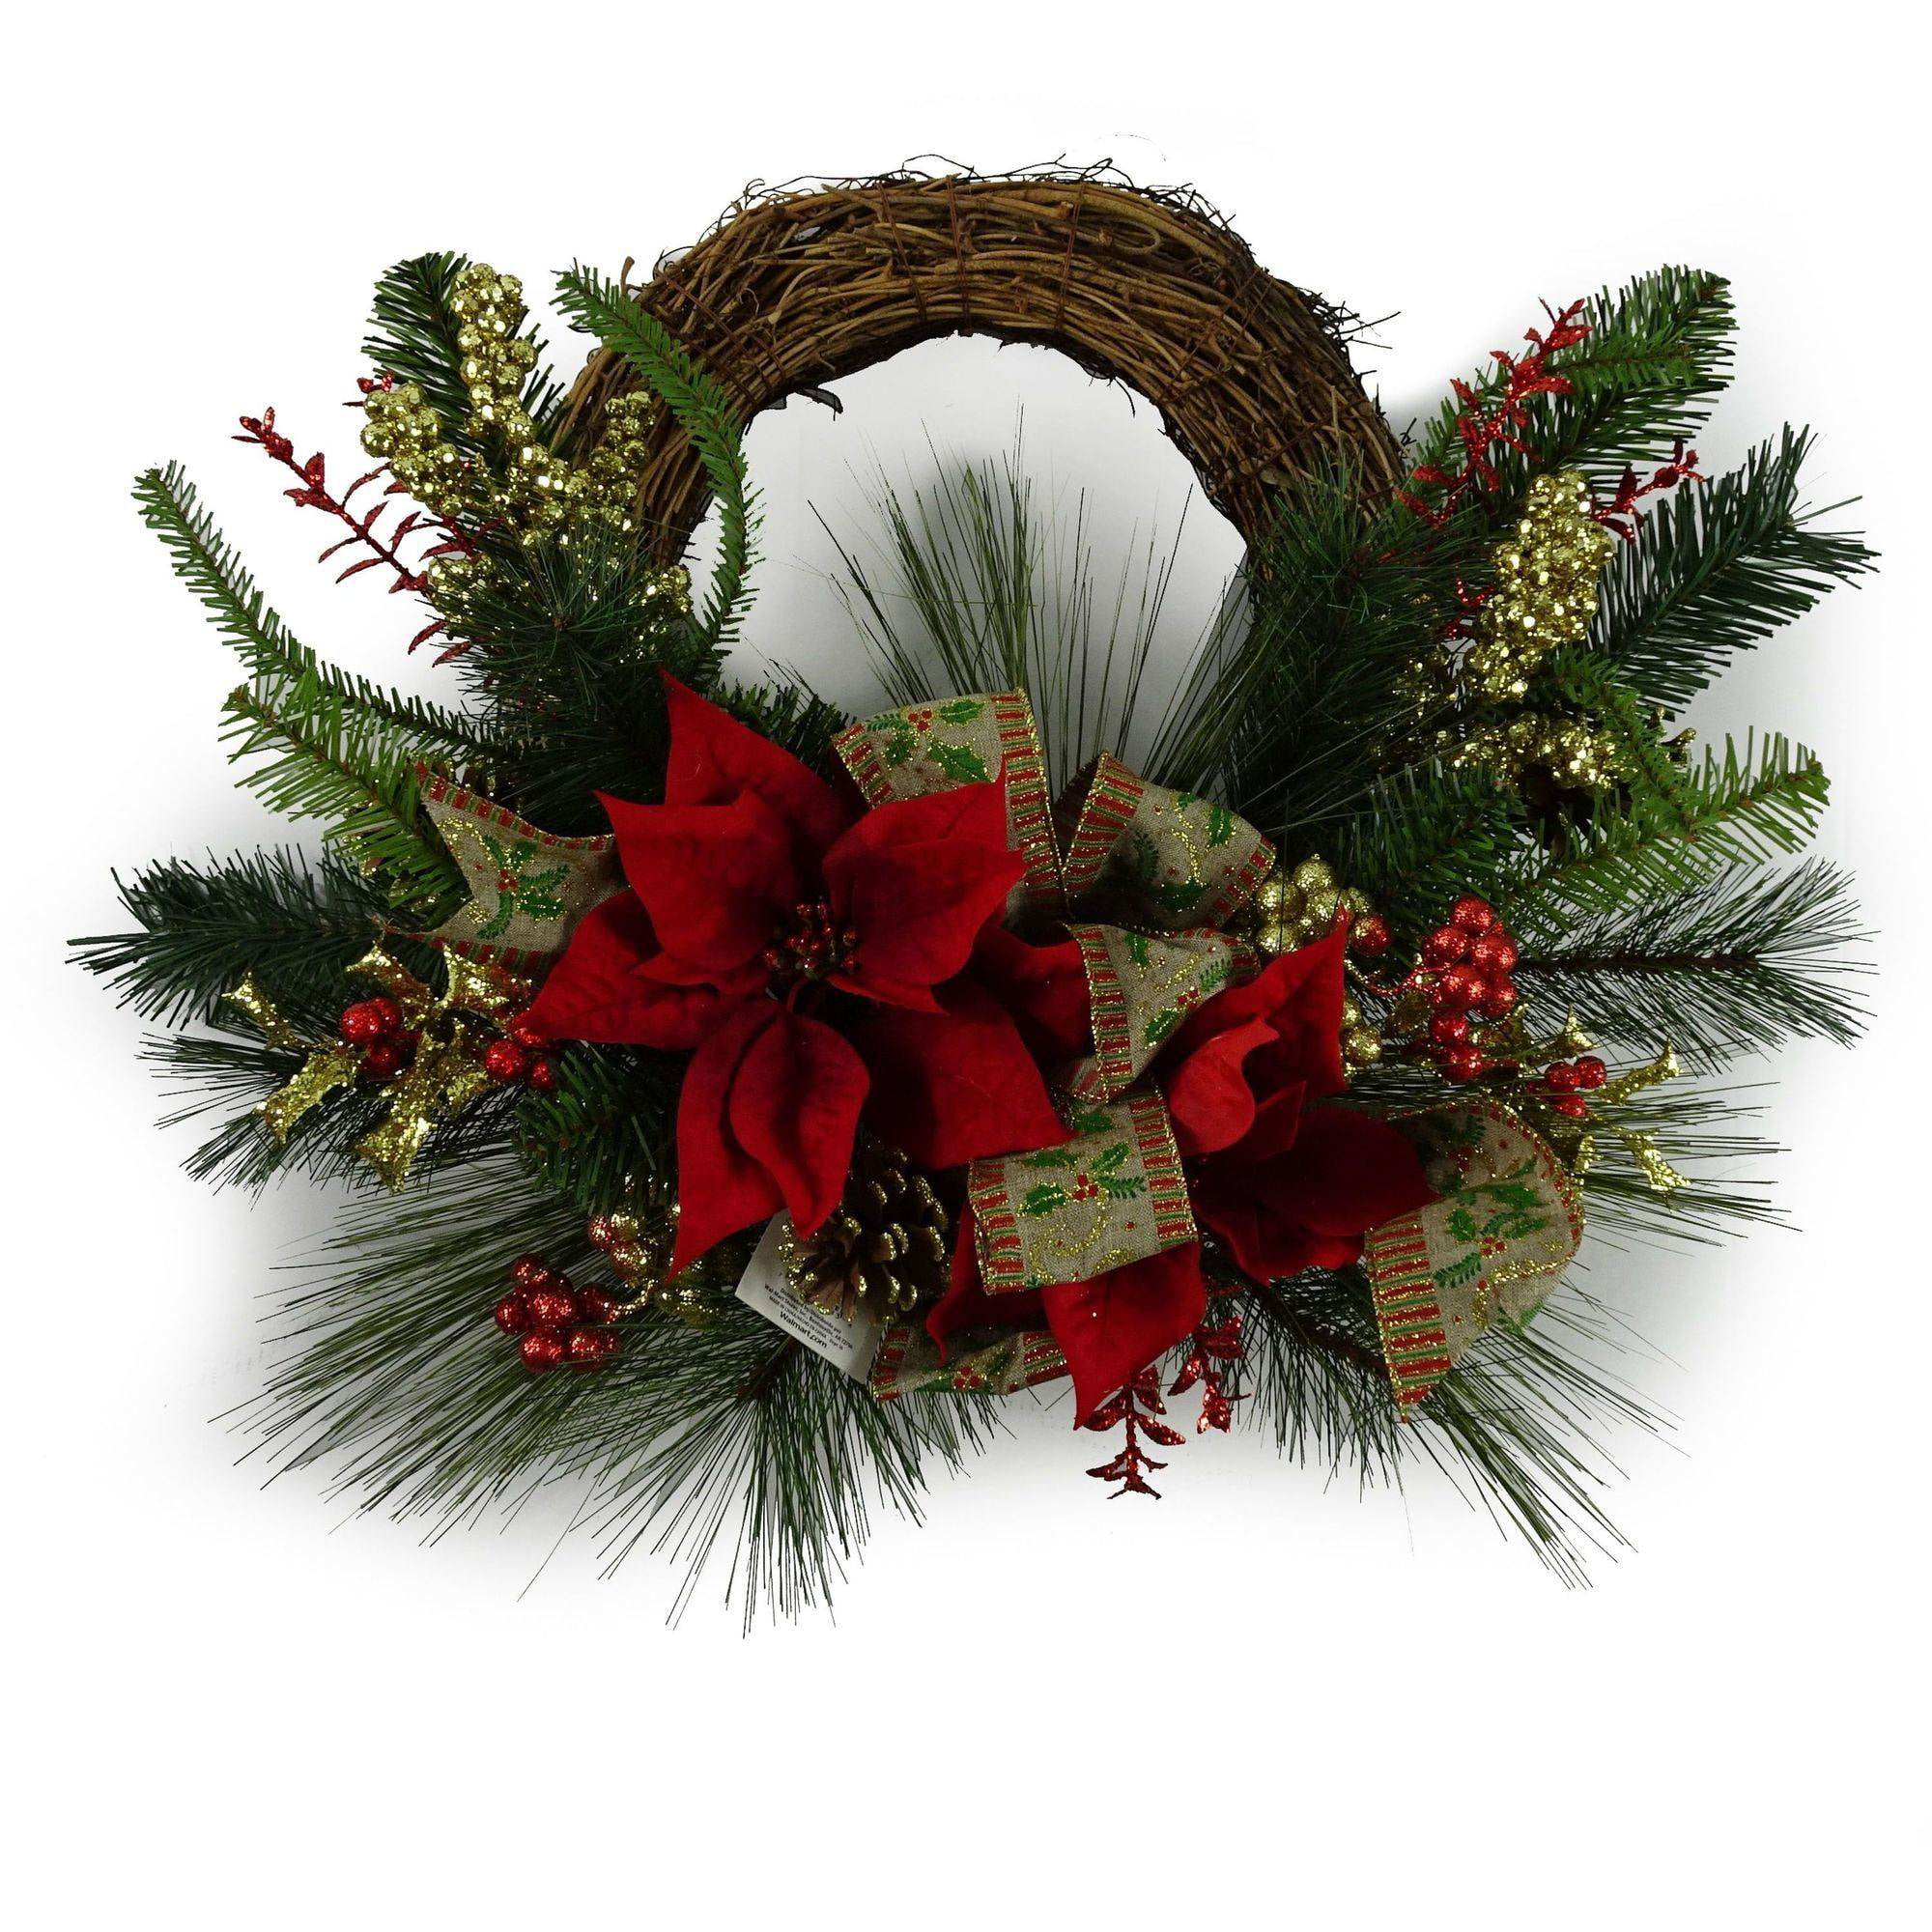 Creatice Decorated Christmas Wreaths for Small Space